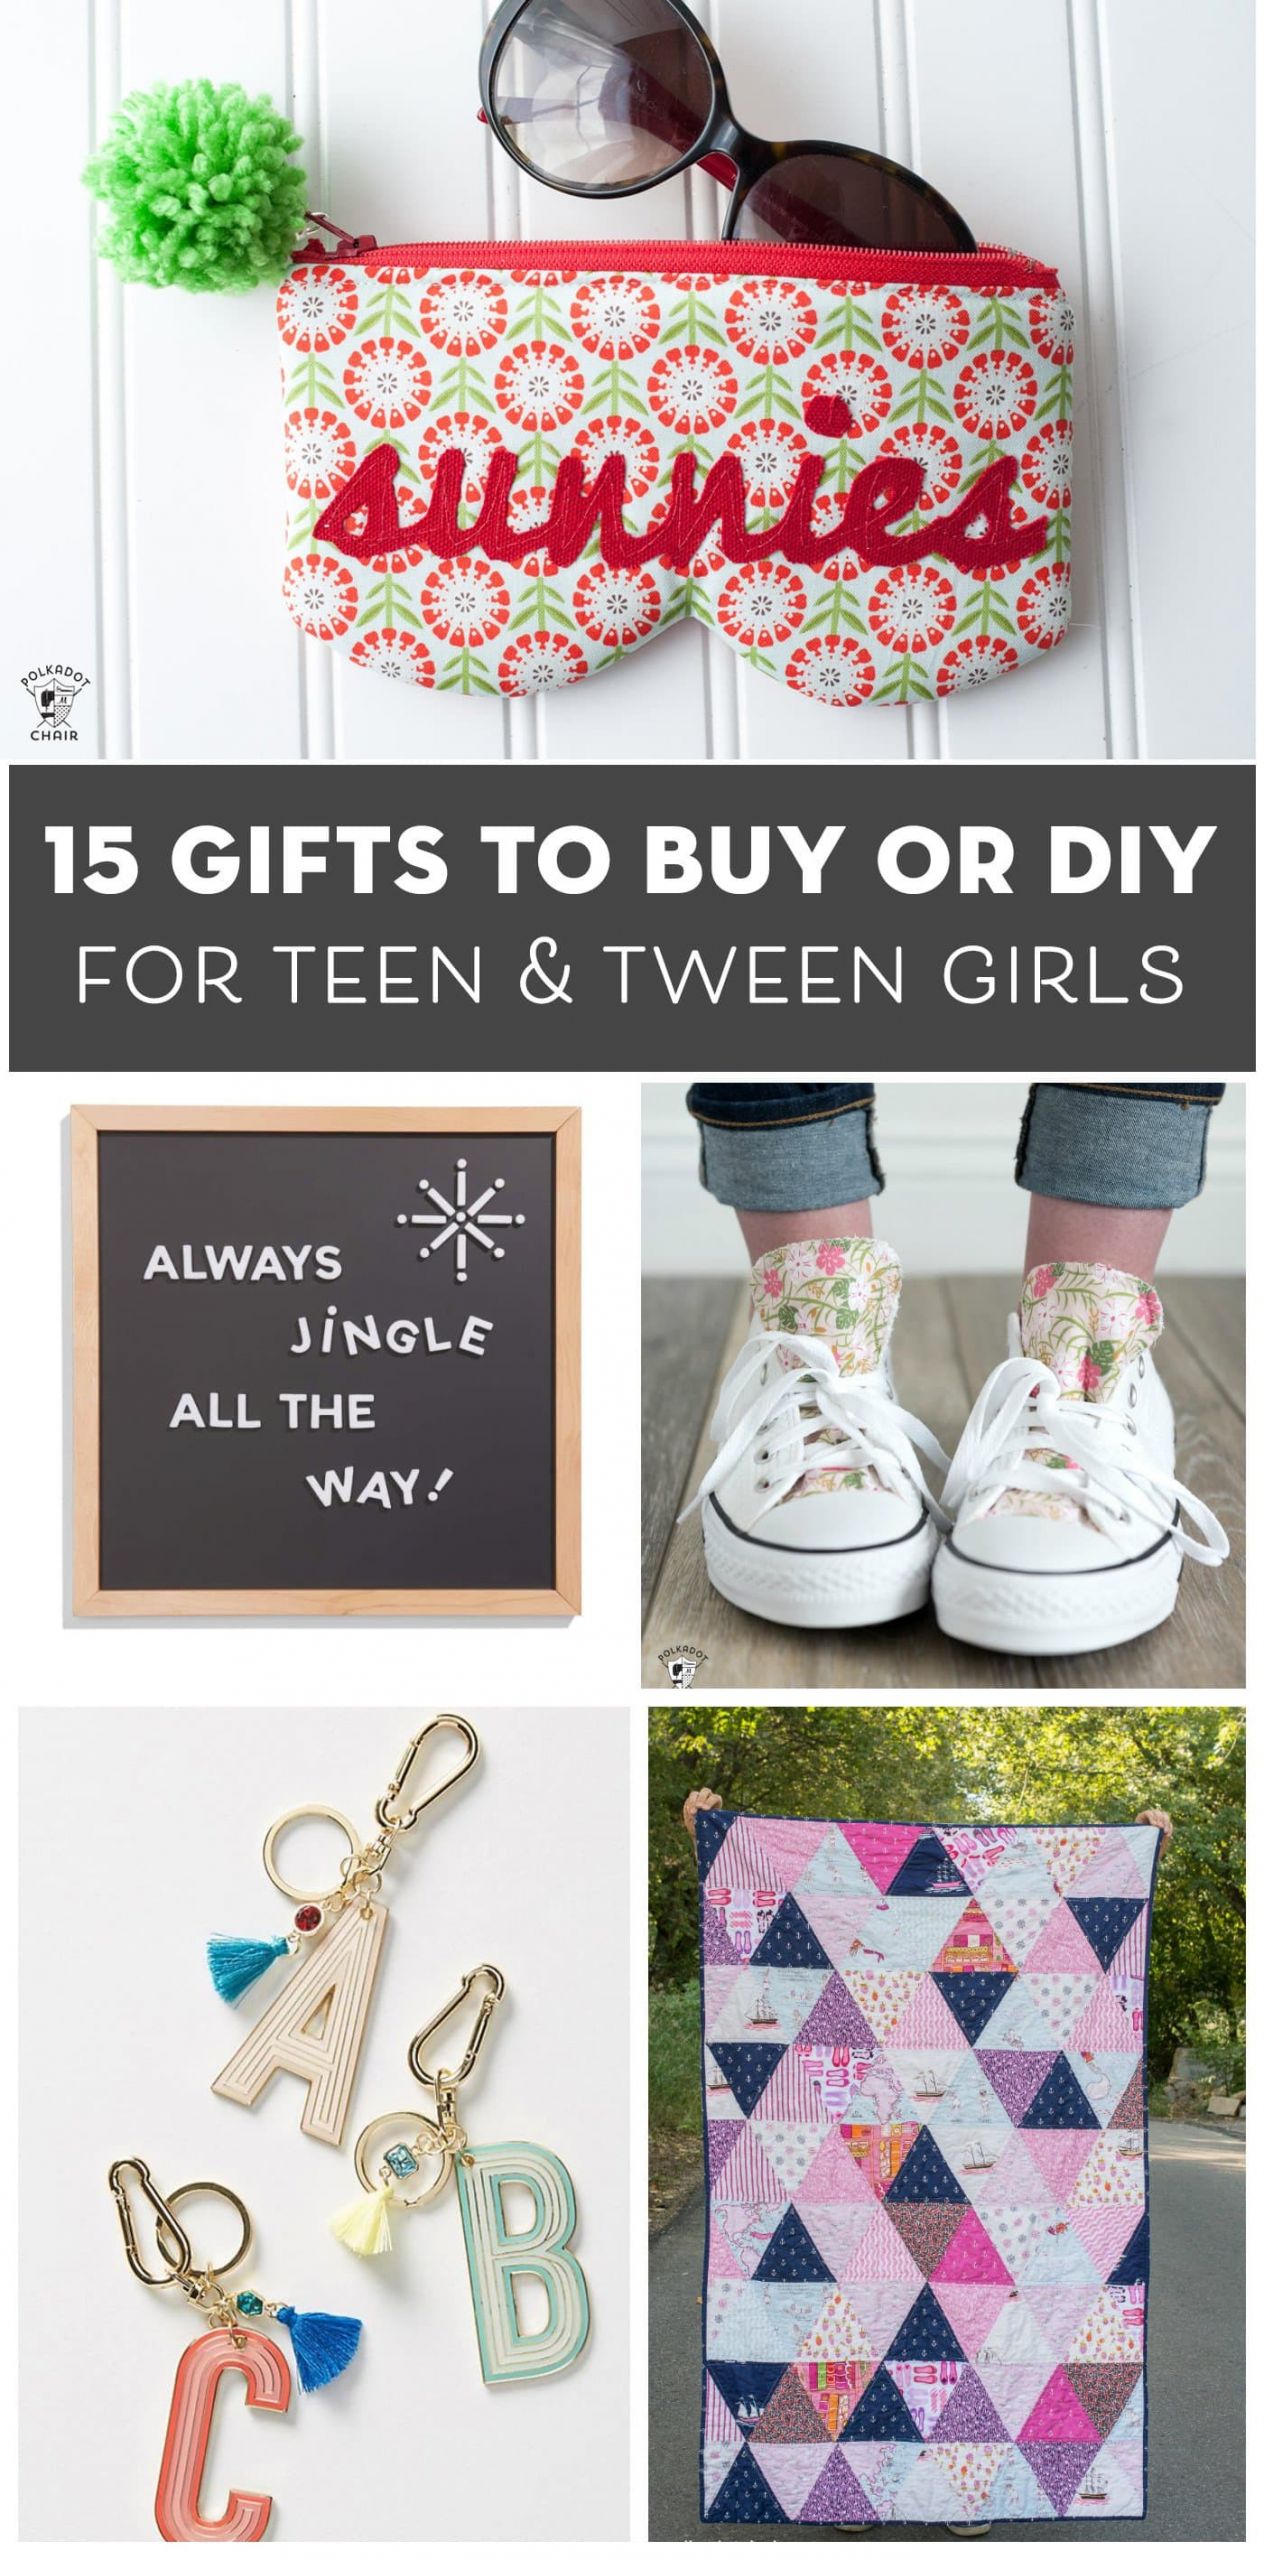 Teenager Gift Ideas For Girls
 15 Gift Ideas for Teenage Girls That You Can DIY or Buy